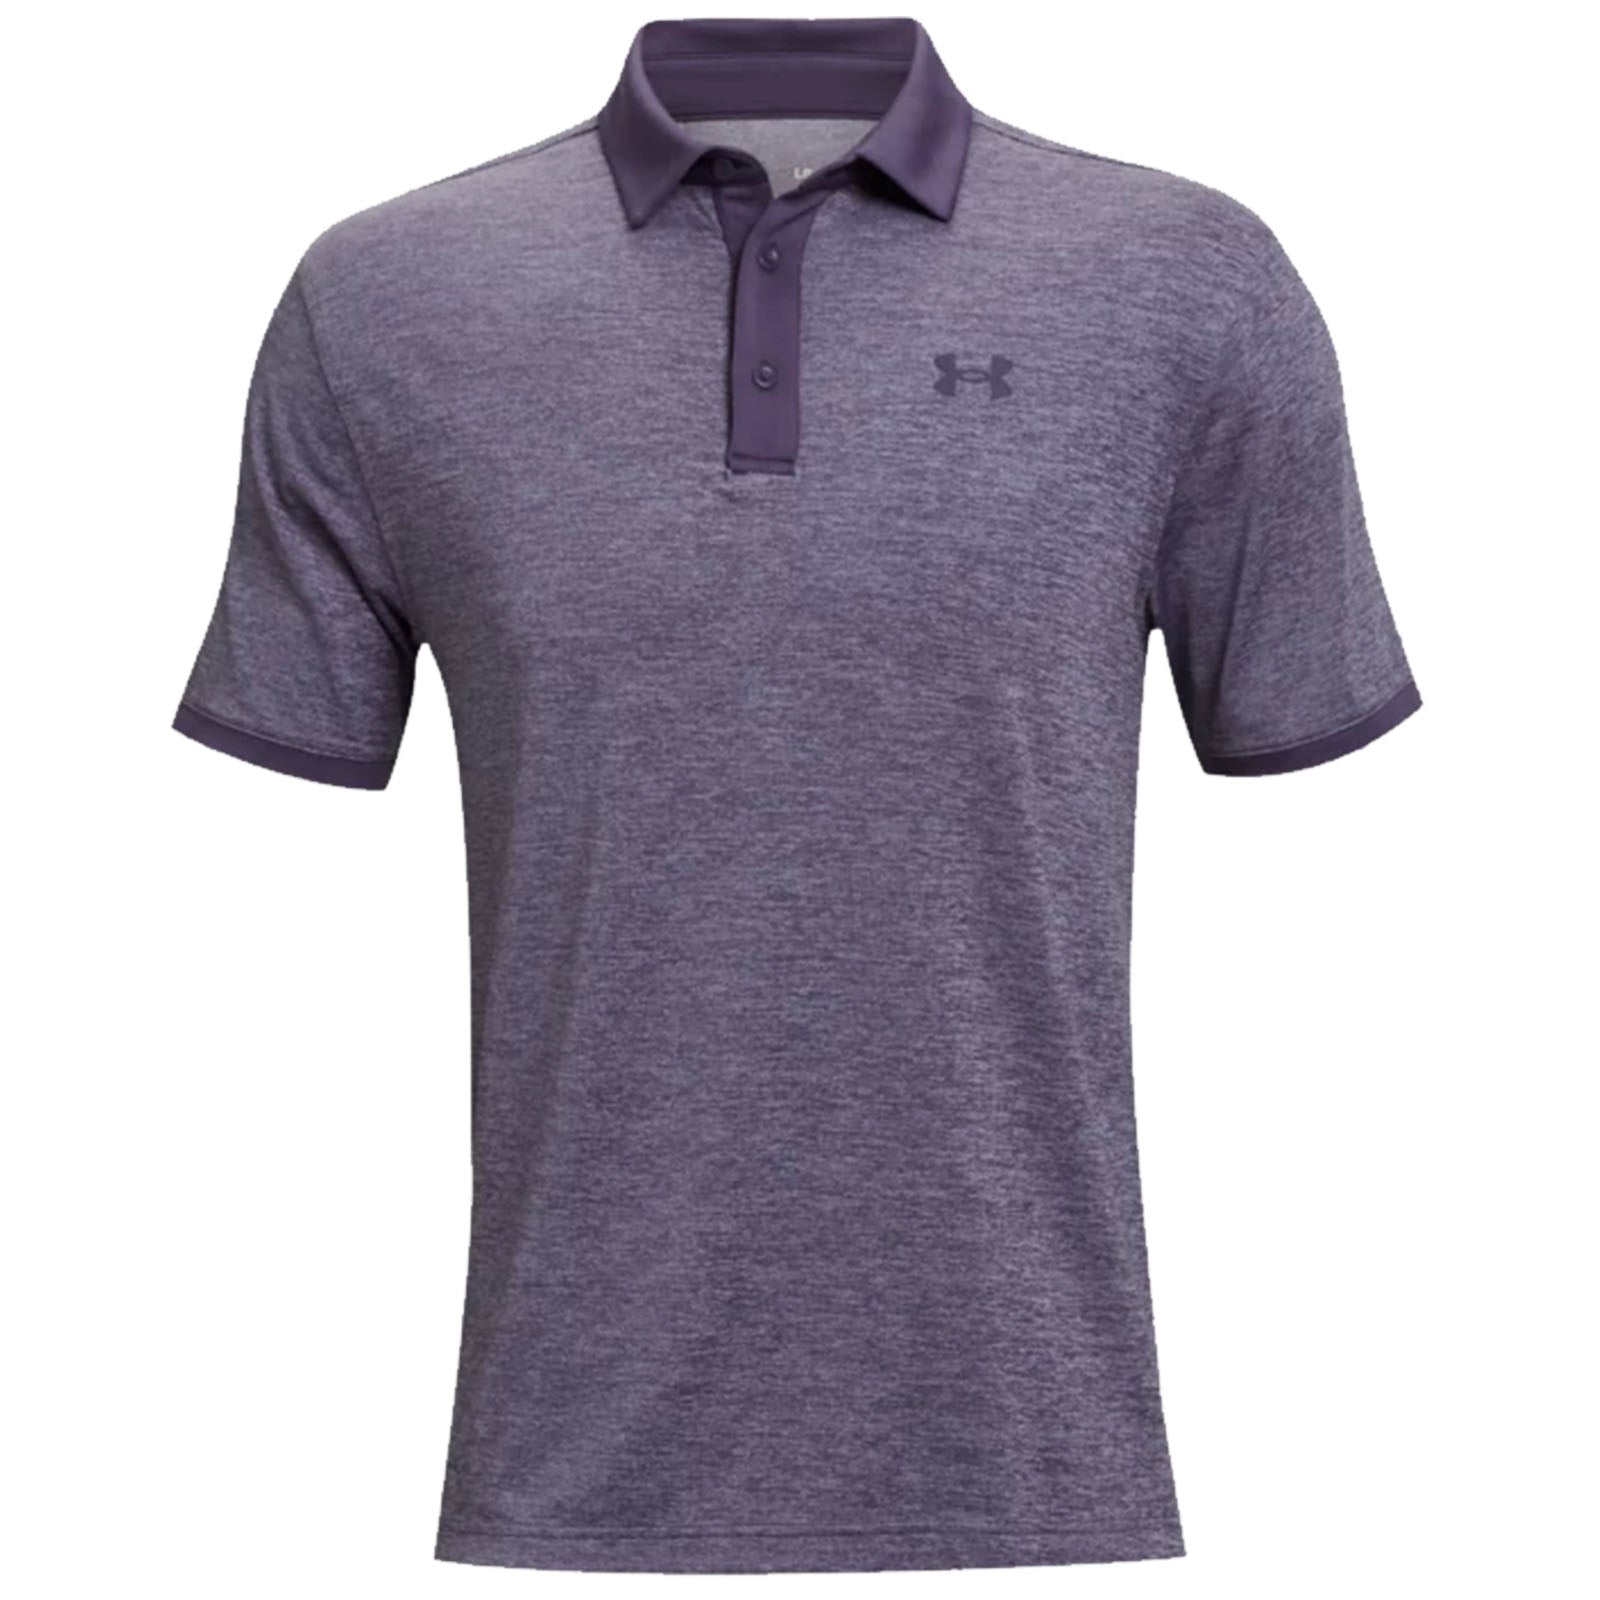 Under Armour Mens Playoff 2.0 Heather Polo Shirt S